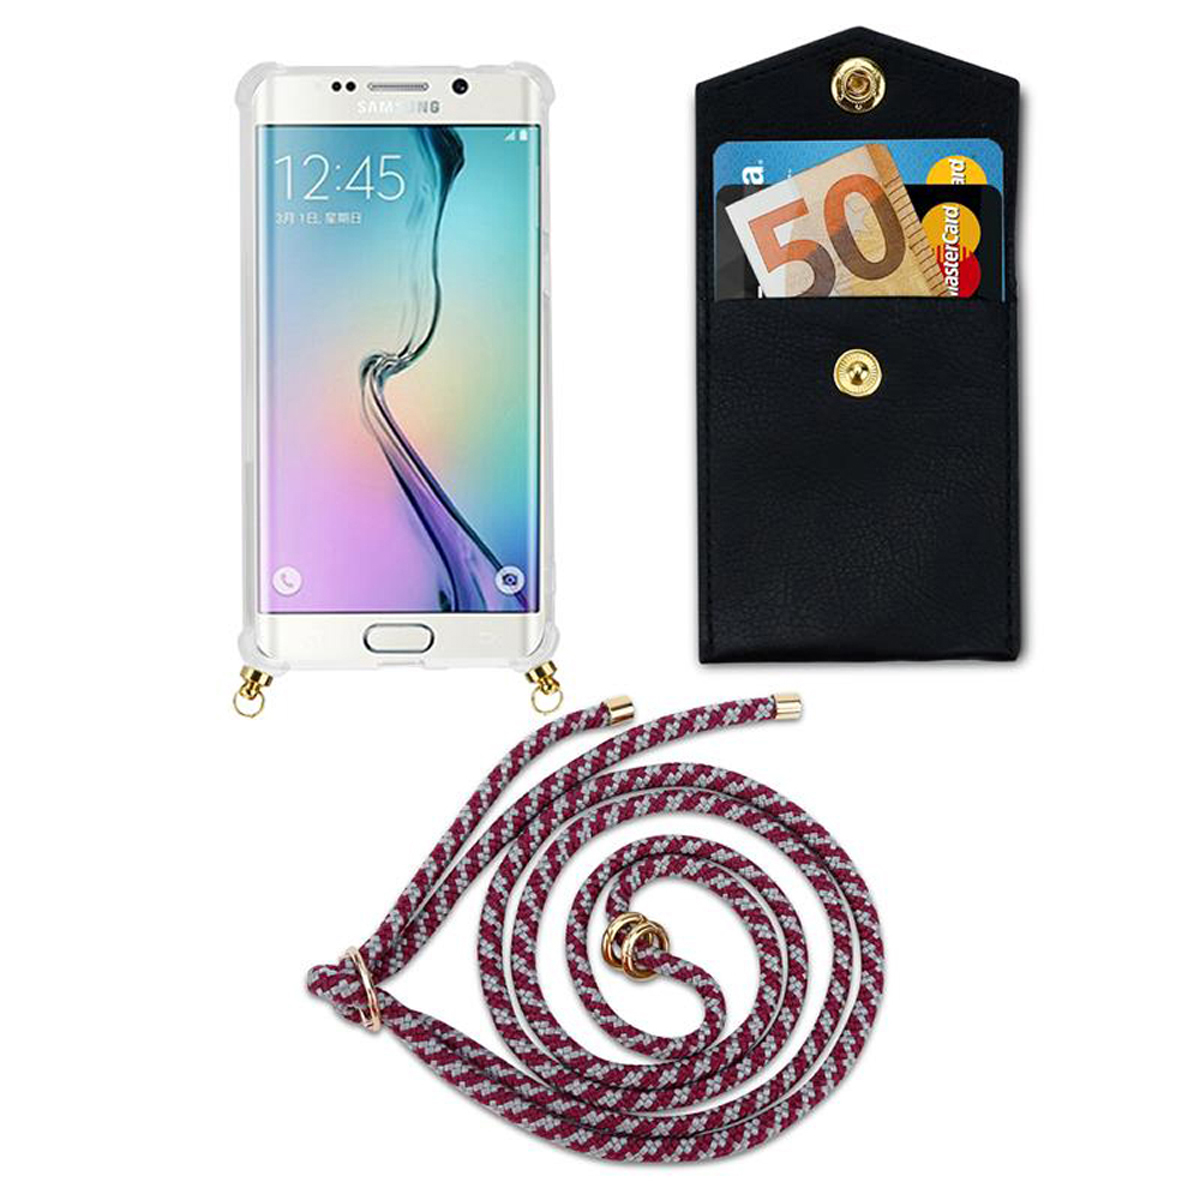 Handy abnehmbarer ROT Gold WEIß Galaxy Ringen, Kordel und Band Kette CADORABO Samsung, Backcover, S6, mit Hülle,